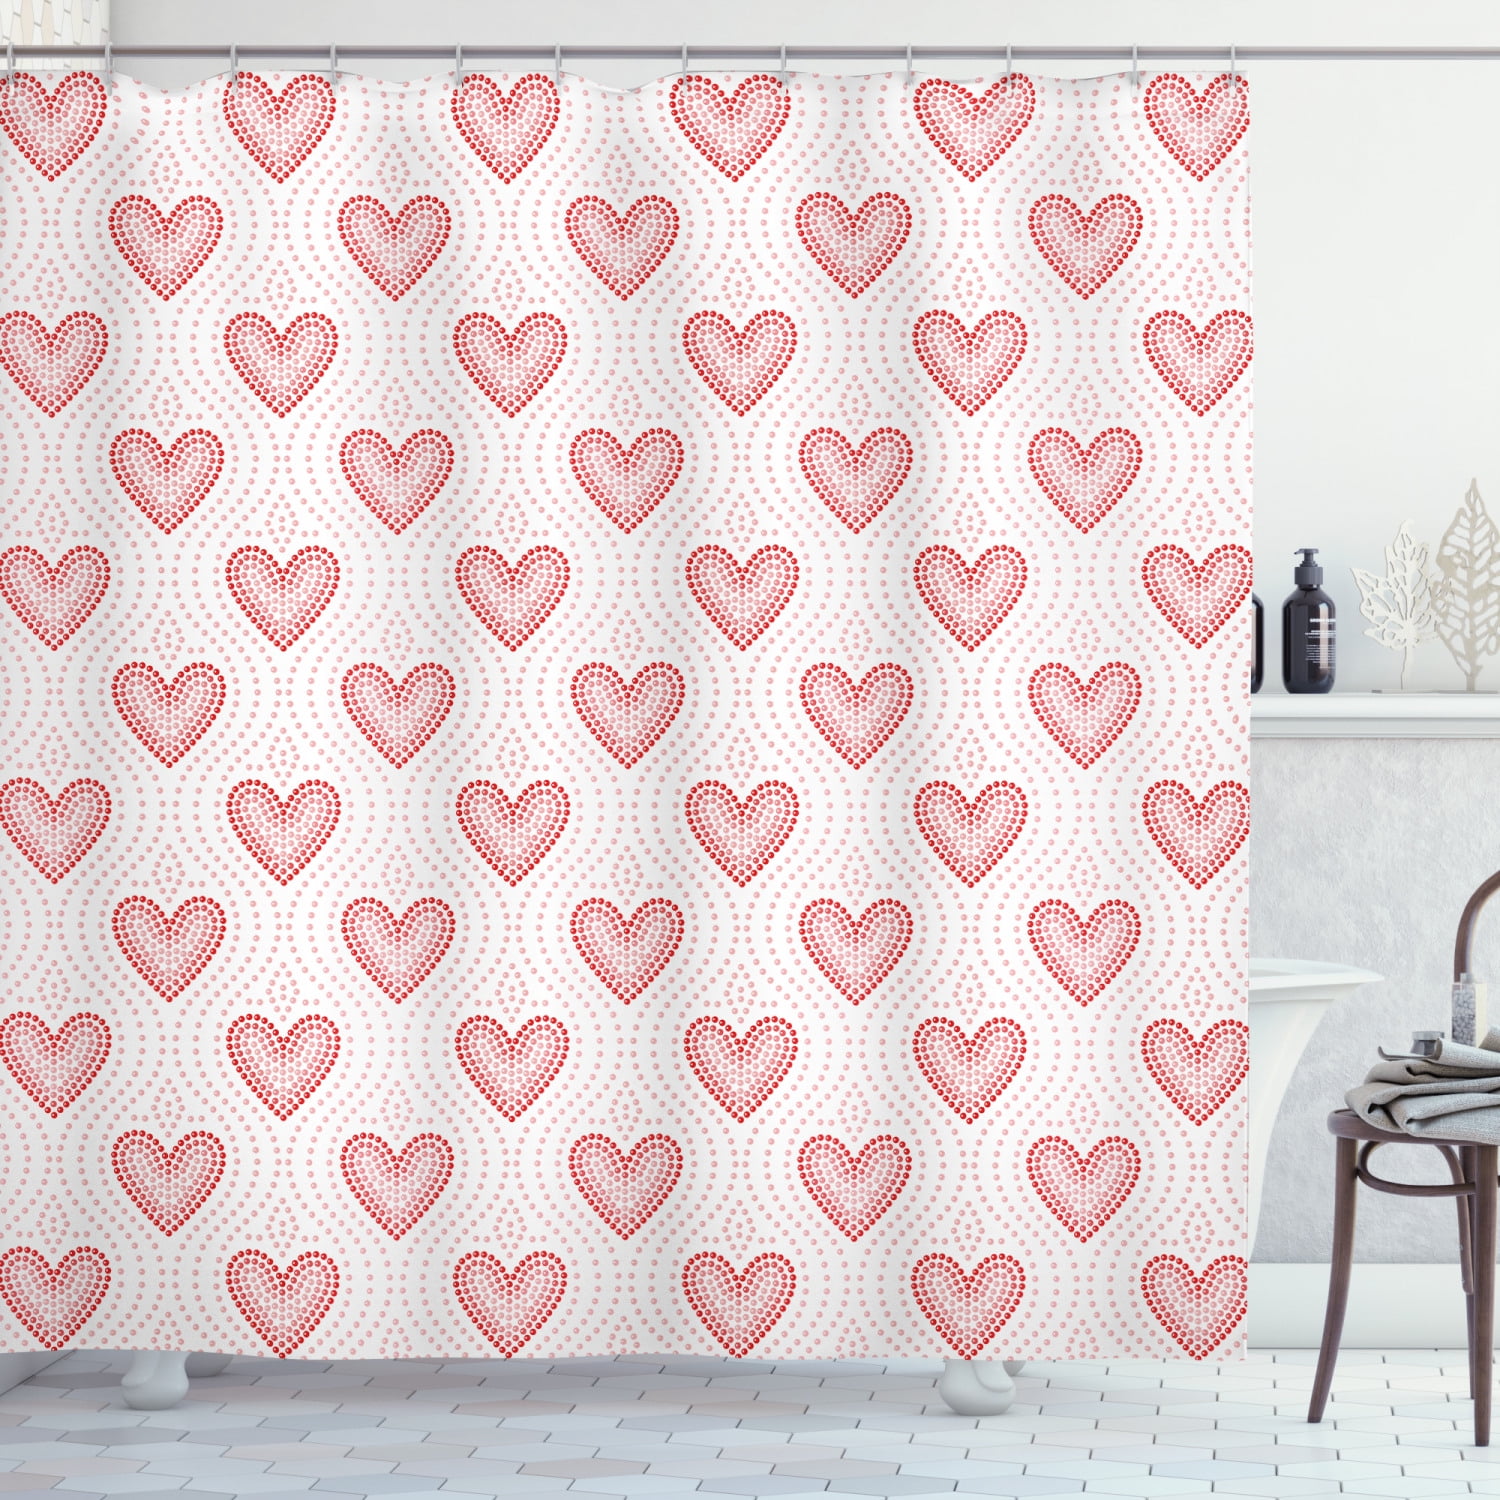 Details about   Fathers Day Spanners Red Hearts Wooden Boards Bathroom Fabric Shower Curtain Set 